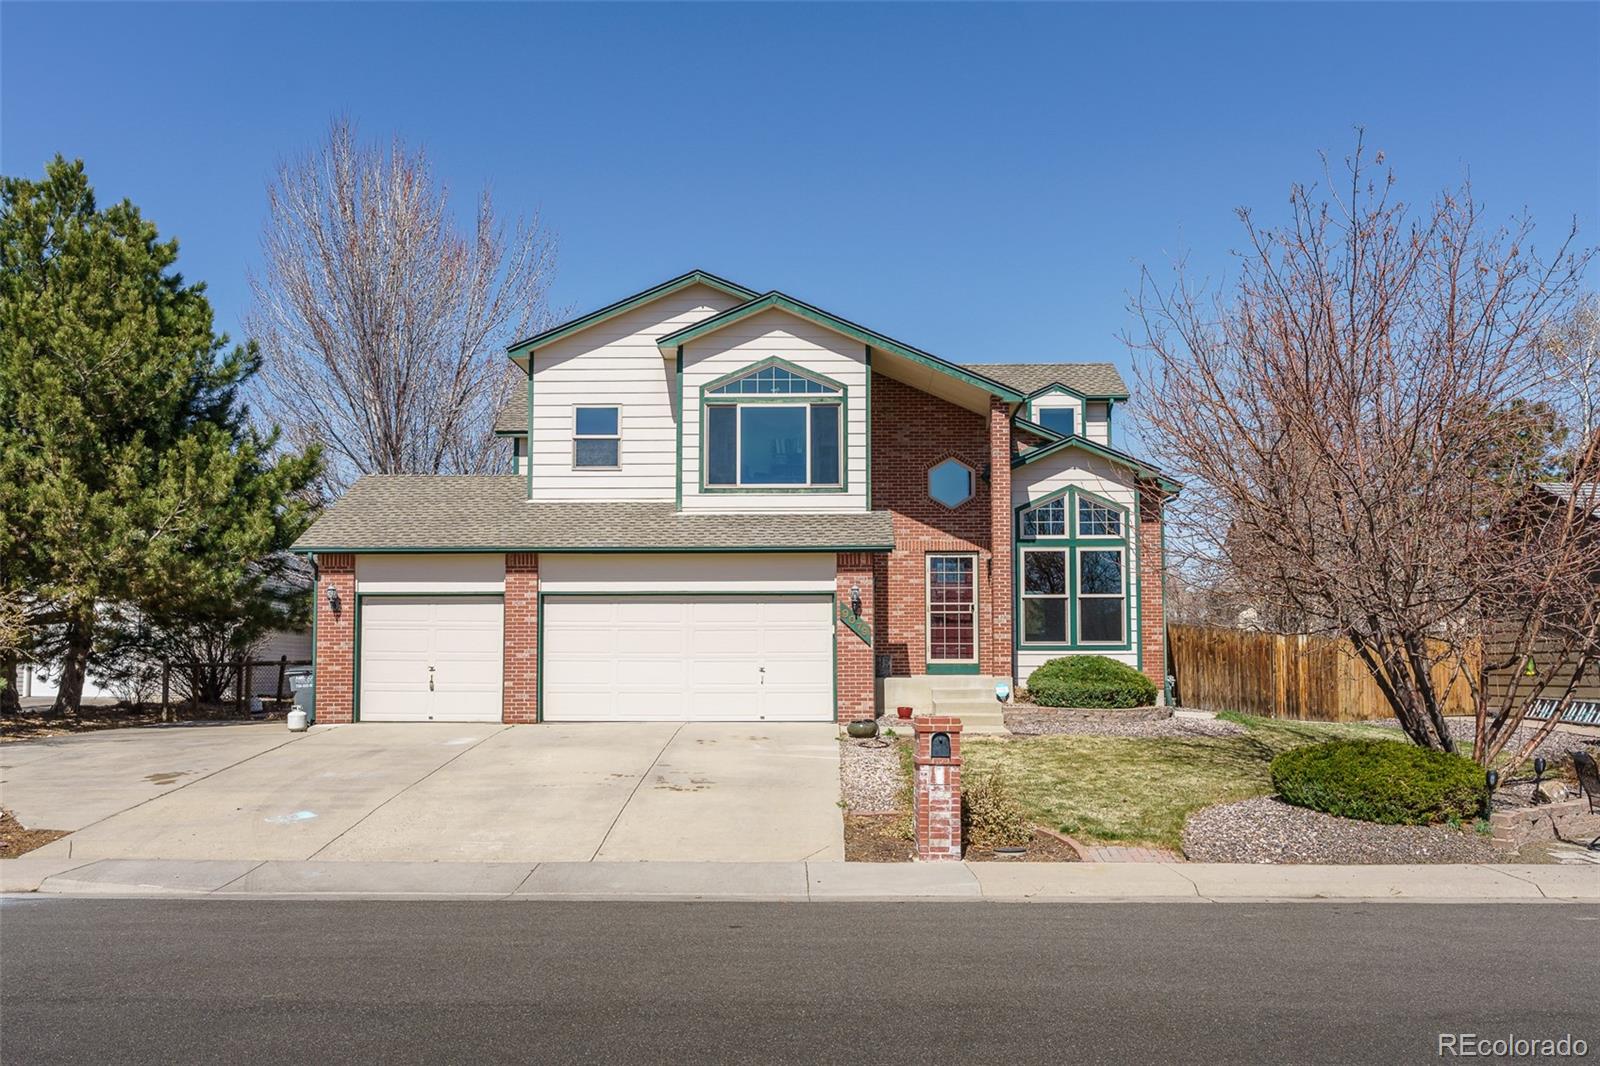 9079 W 65th Place, arvada MLS: 7168462 Beds: 5 Baths: 4 Price: $749,950